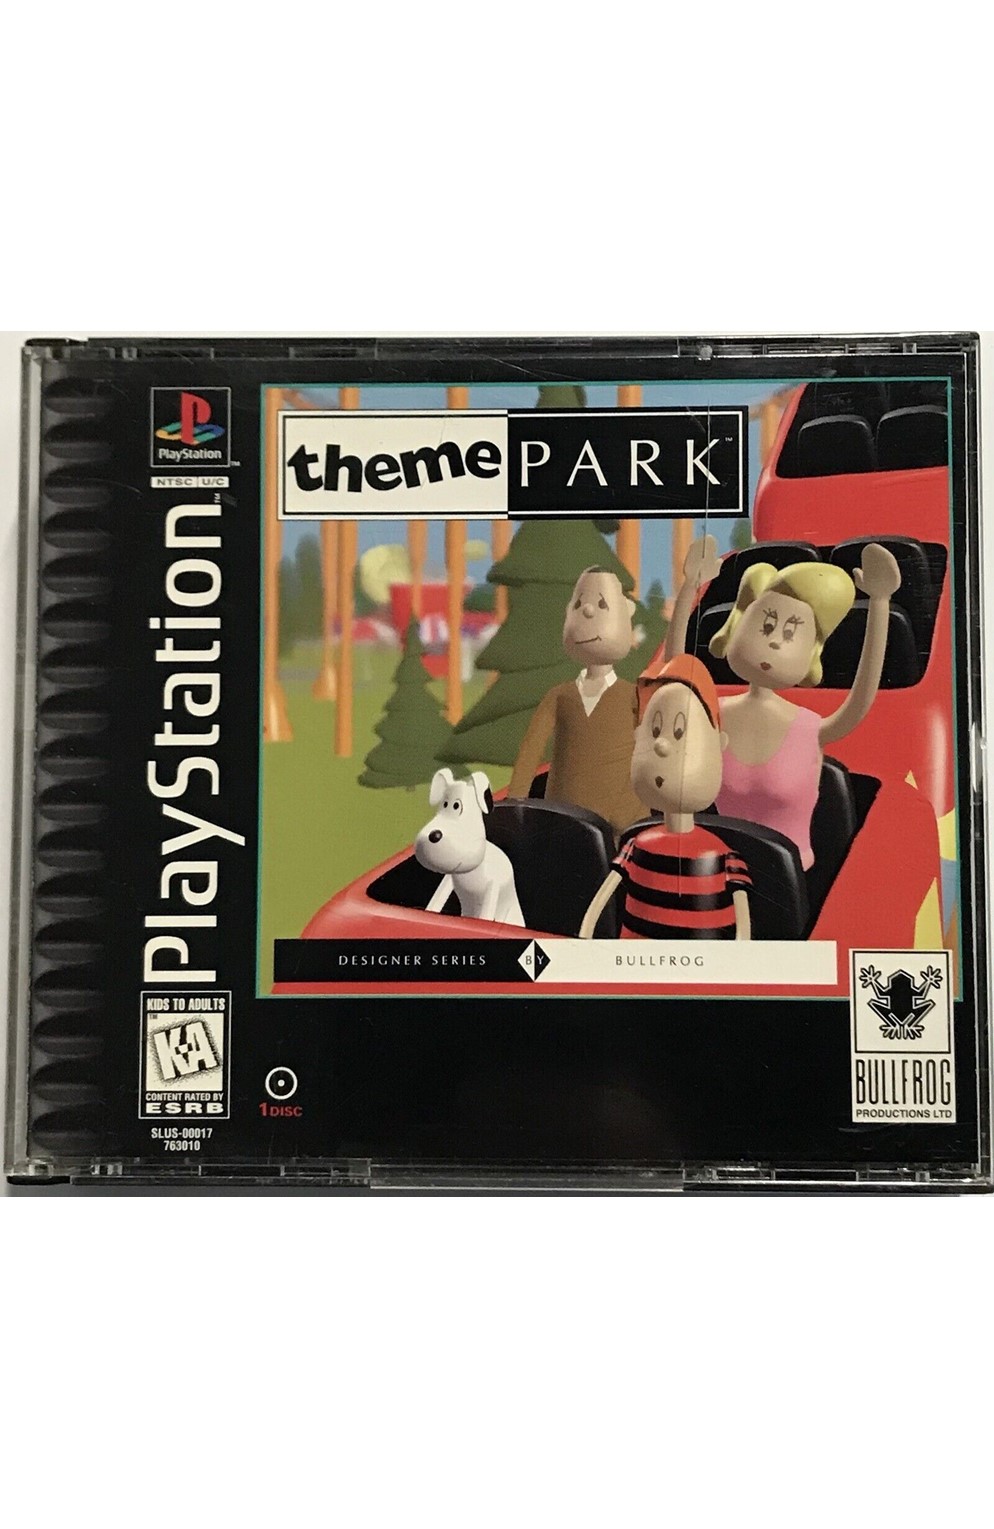 Used PS1 Games, Playstation 1 Games For Sale